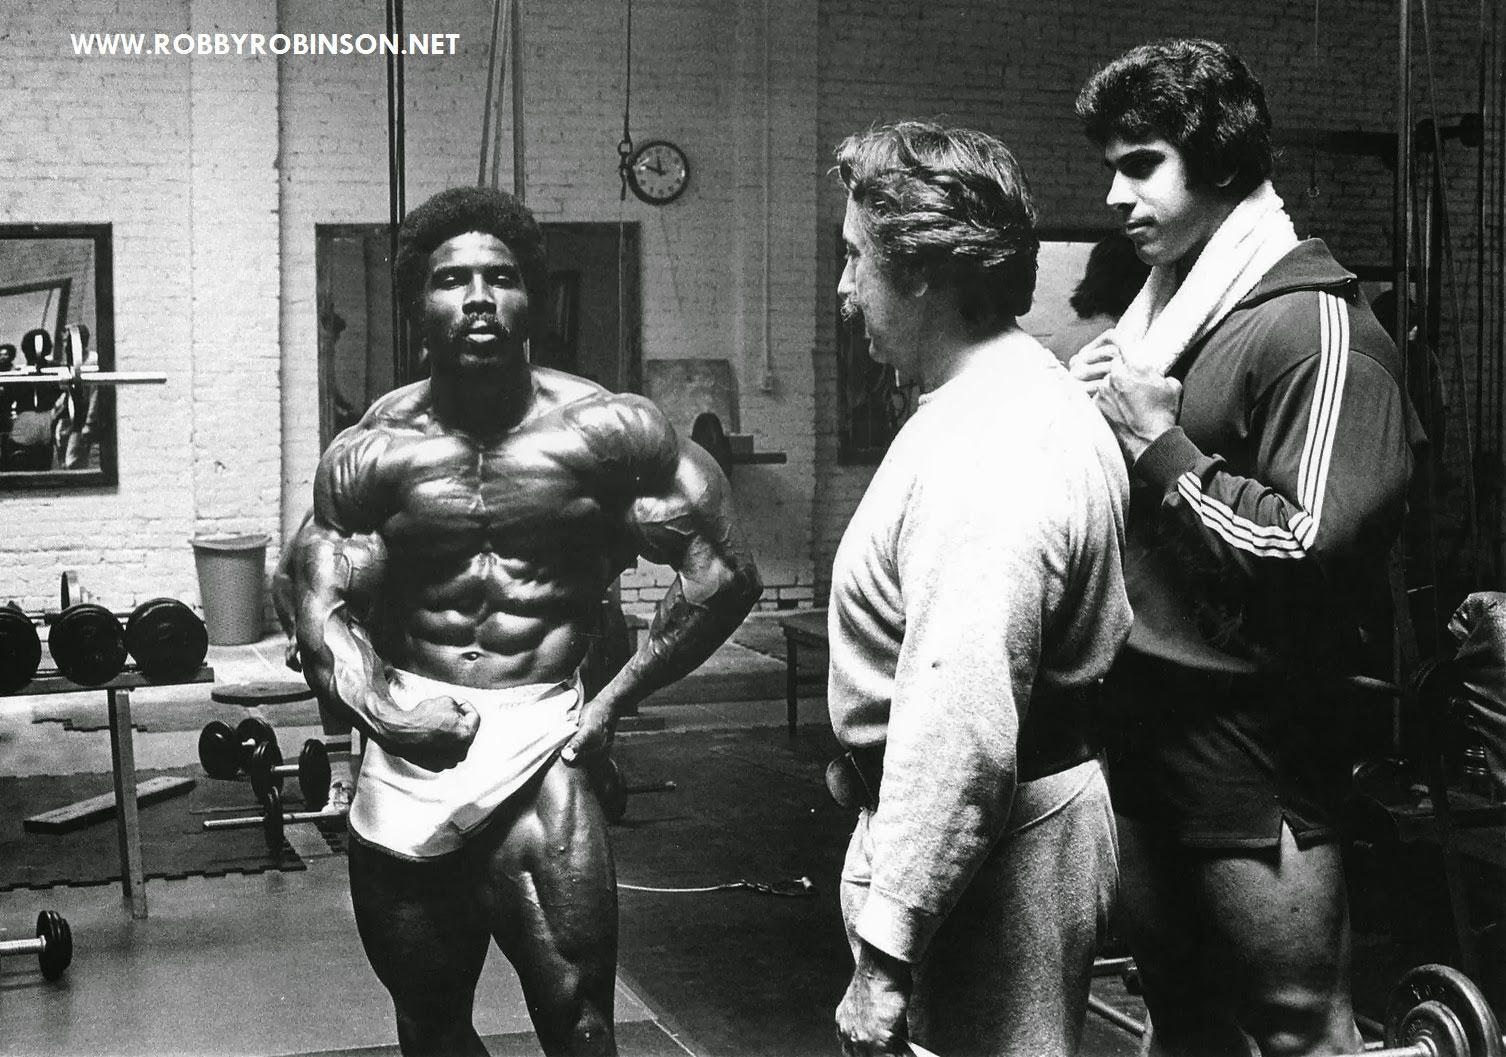 ROBBY ROBINSON, LOU FERRIGNO AND JOE WEIDER TRAINING AND POSING IN GOLD'S GYM 70S ● www.robbyrobinson.net/motivation.php ●